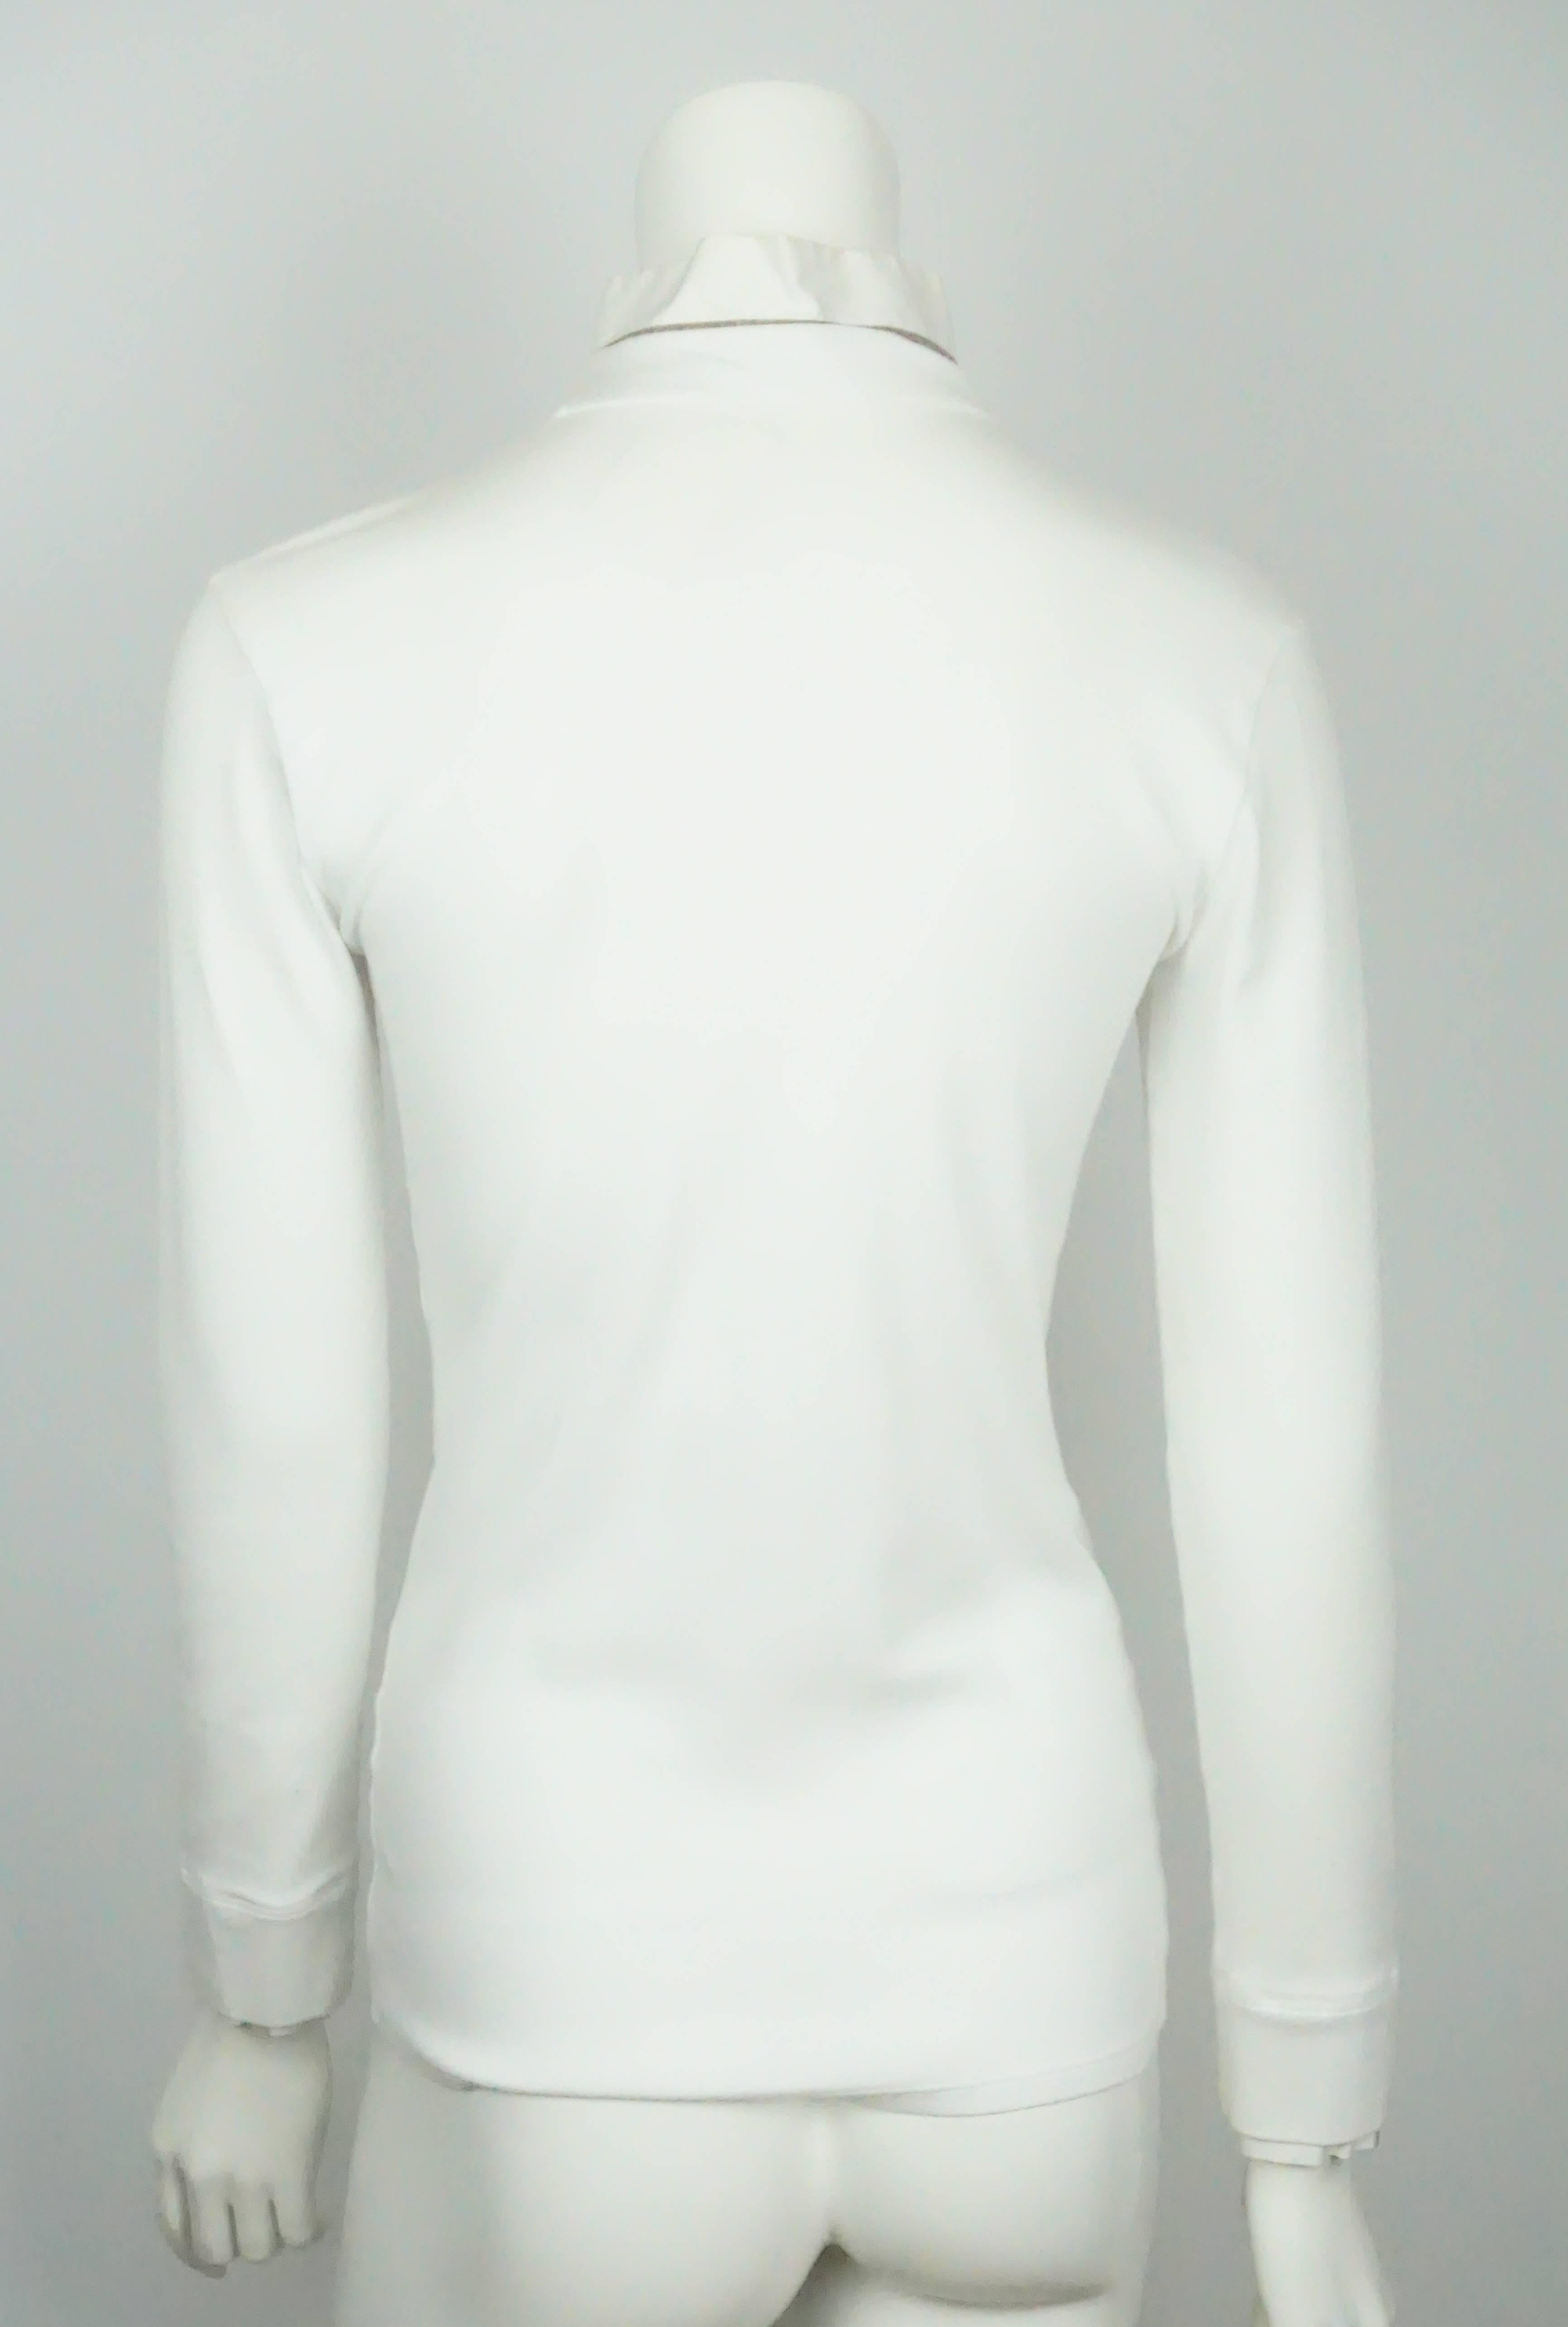 Gray Brunello Cucinelli White Cotton Knit Long Sleeve Top with mandarin collar-L